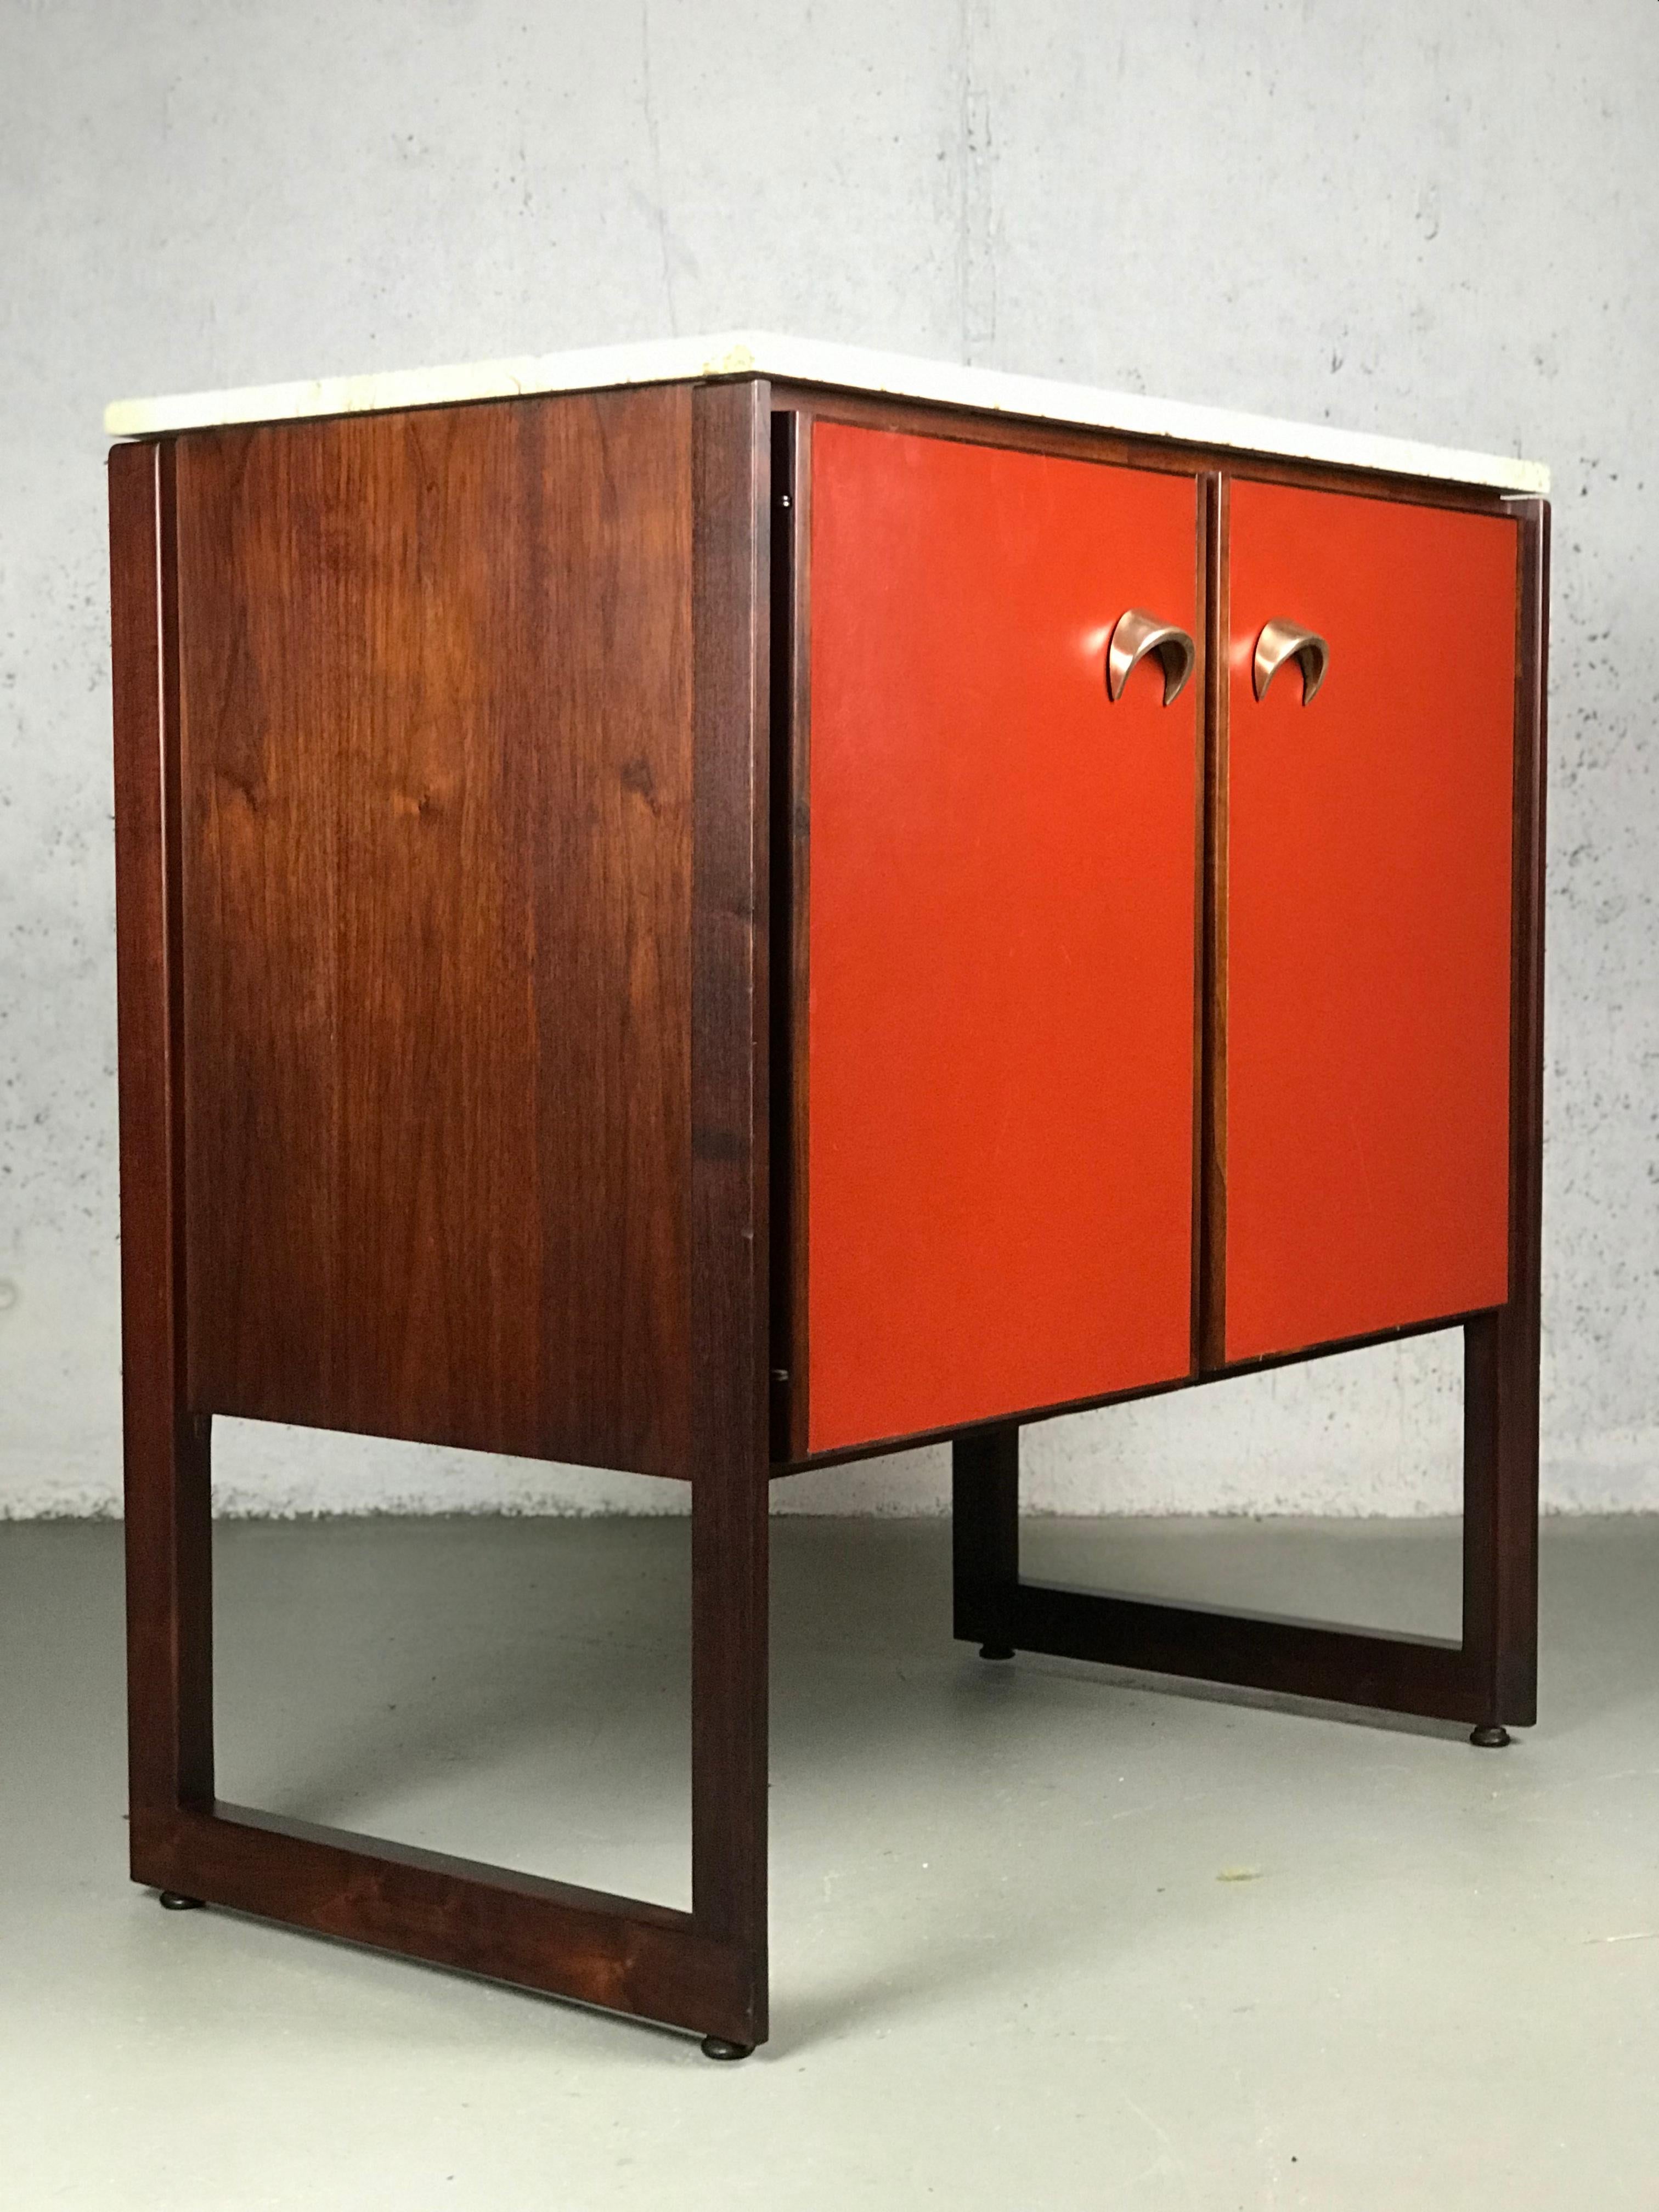 Wonderful example of American modernism by Jens Risom. This cabinet is made of an array of contrasting materials: walnut, rosewood, travertine marble, red vinyl and brass. Rosewood is used in the trim around the doors, framing pieces and legs. There